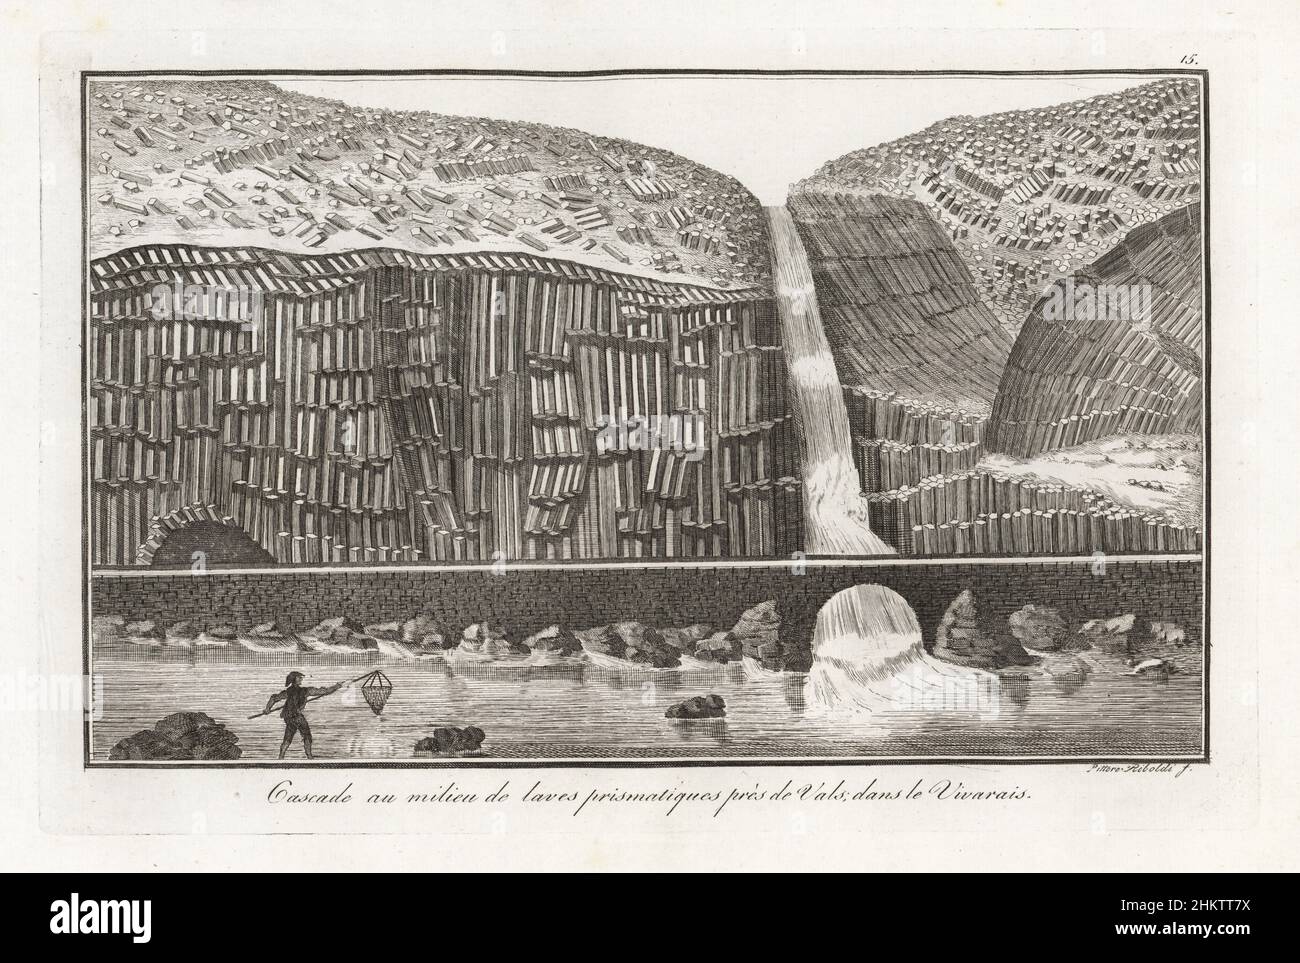 Waterfall in the middle of prismatic lava near Vals, Vivarais/Ardeche range, France. A fisherman uses a net in the river. Cascade au milieu de laves prismatiques pres de Vals dans le Vivarais. Copperplate engraving by Milanese painter Gaetano Riboldi from Scipion Breislak’s Traite sur la Structure Exterieure du Globe, Treatise on the Exterior Structure of the Globe, Jean-Pierre Giegler, Milan, 1822. Stock Photo